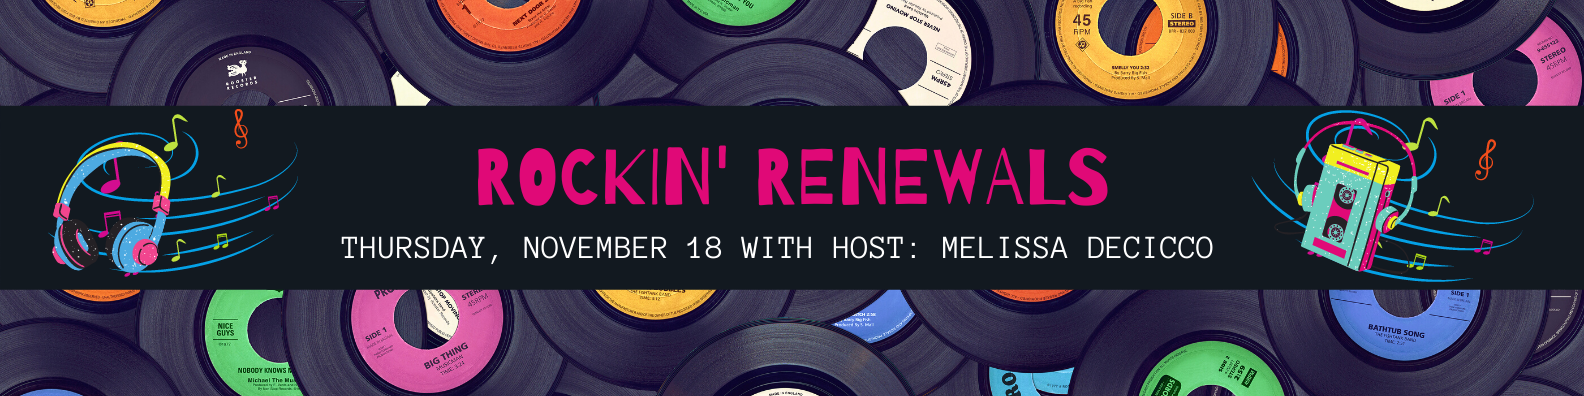 Rockin Renewals banner with records